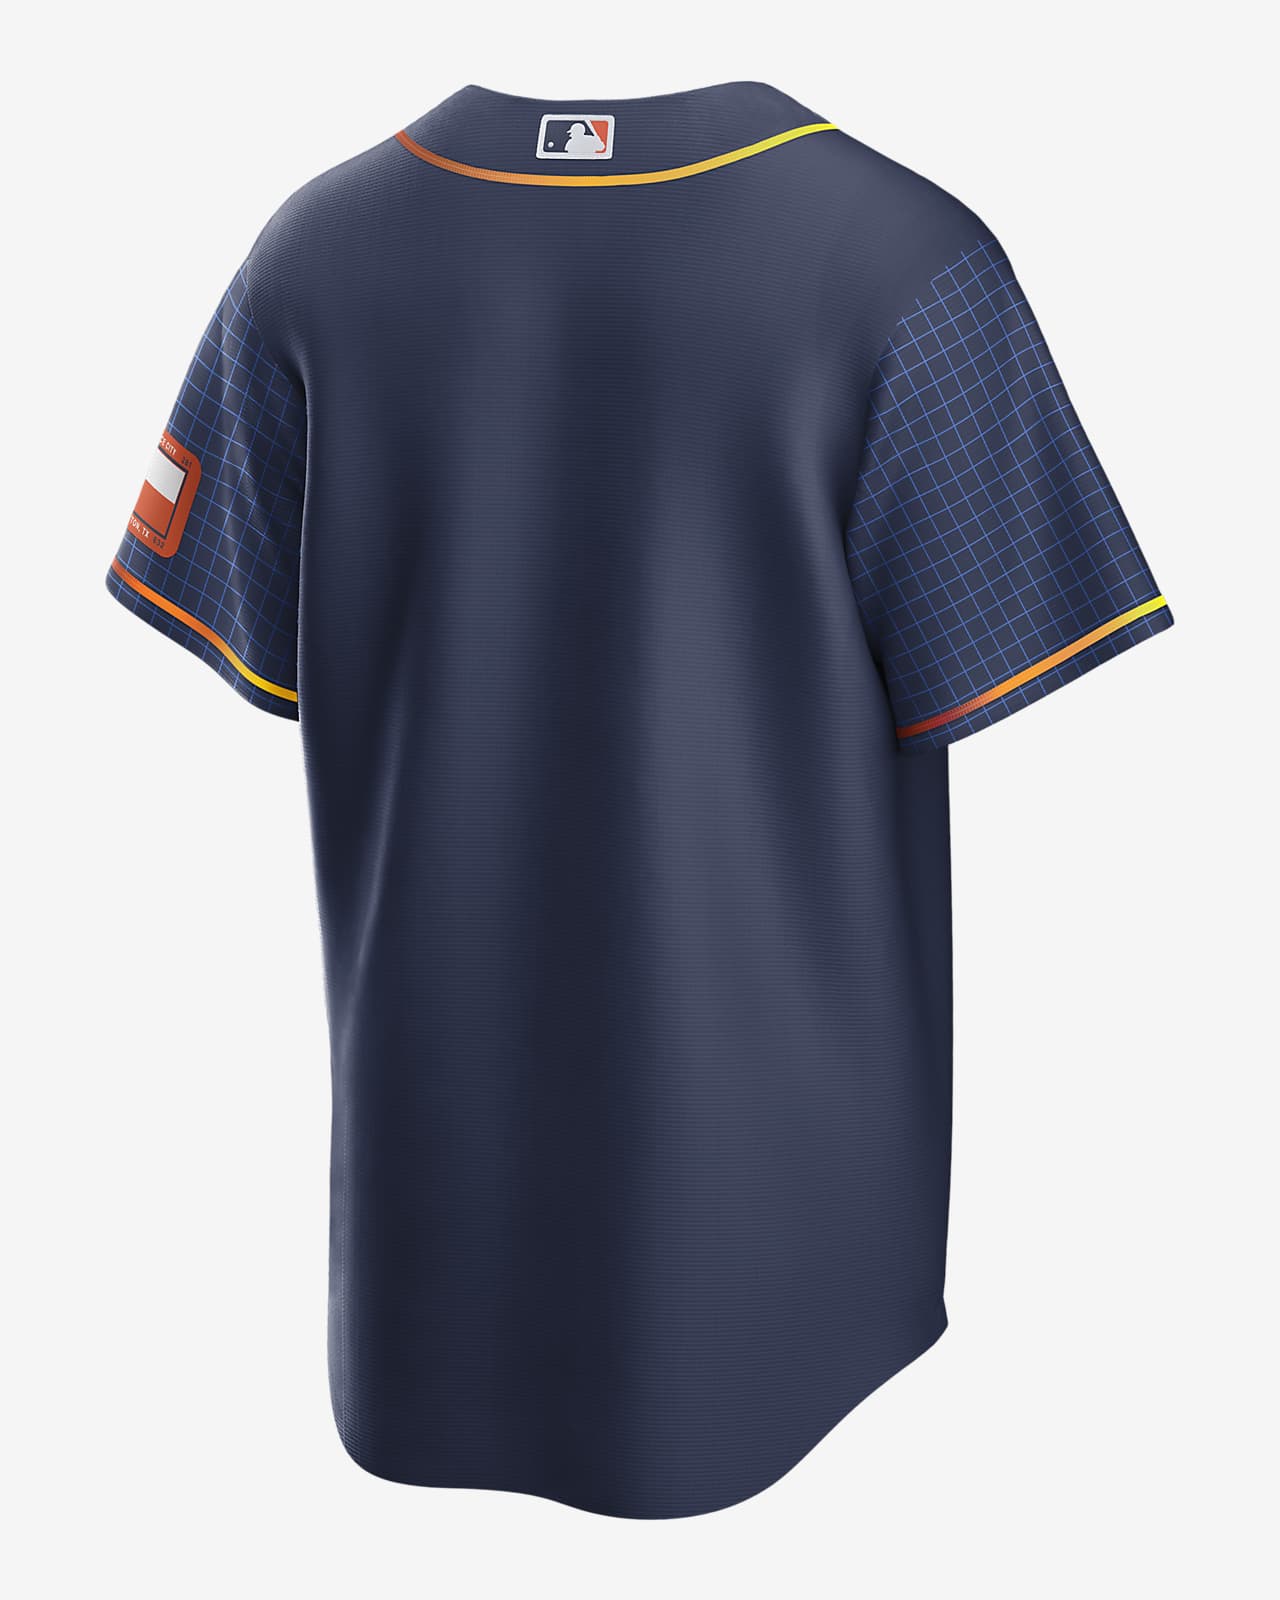 space city connect jerseys